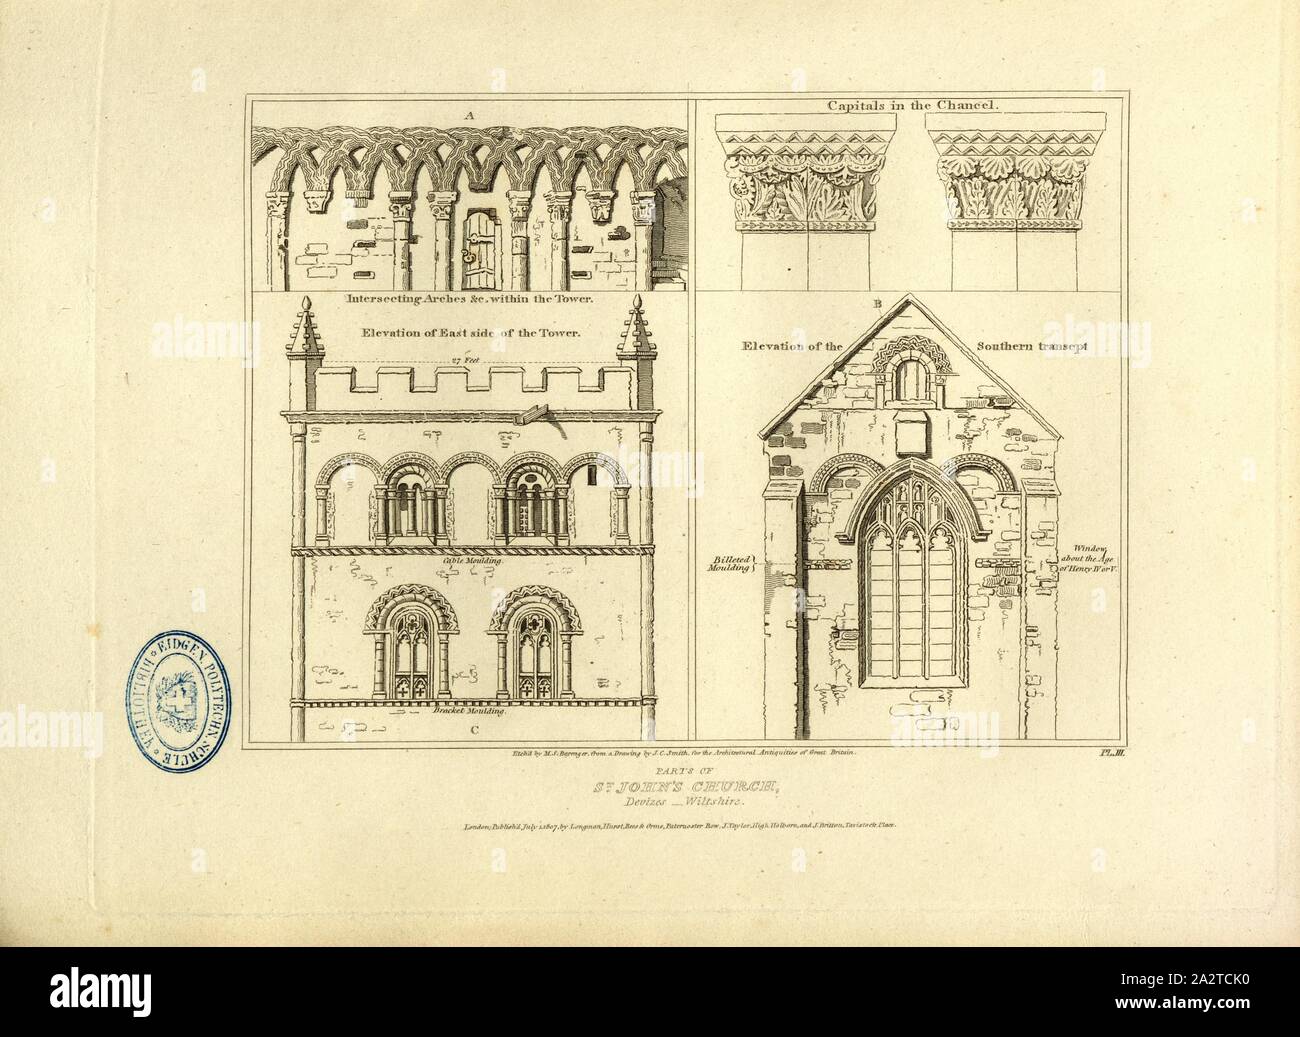 St. John's Church, Devizes Wiltshire, Details of St. John's Church at Devizes in Wiltshire, signed: Etch'd by M.S. Barenger, from a Drawing by J. C. Smith, Fig. 5, Pl. III, to p. 6, Smith, J. C. (Drawing); Barenger, M. S. (Etching), 1807, John Britton: The architectural antiquities of Great Britain: represented and illustrated in a series of views, elevations, plans, sections and details of various ancient English edifices: with historical and descriptive accounts of each. Bd. 2. London: J. Taylor, 1807-1826 Stock Photo